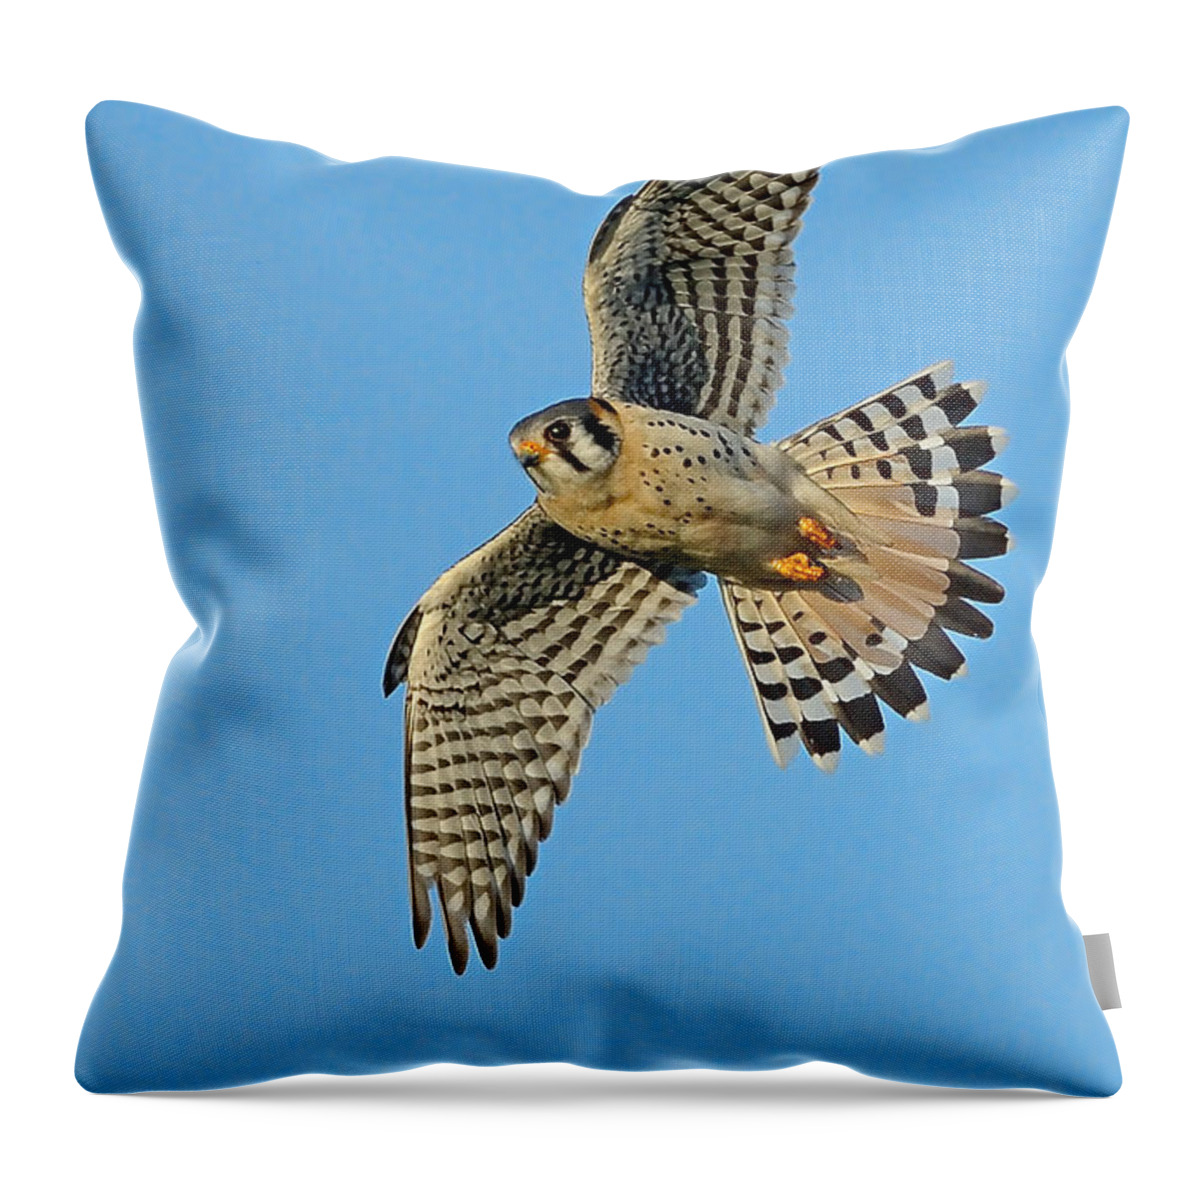 American Kestrel Throw Pillow featuring the photograph American Kestrel by William Jobes